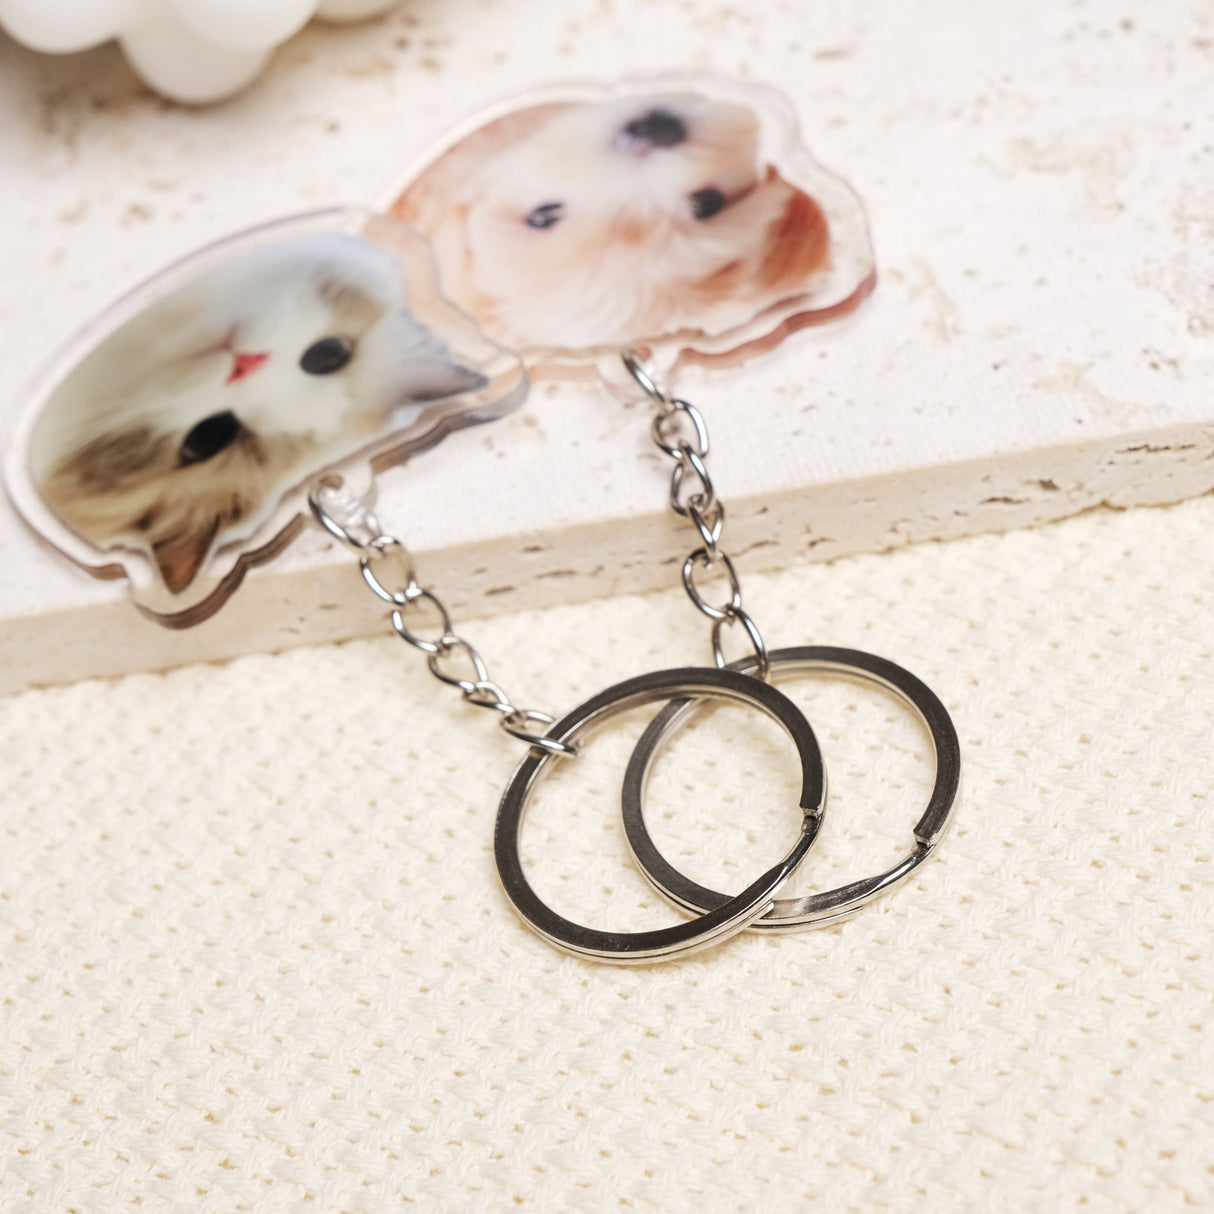 GEX Personalized Pet Photo Key Chain Pet Portrait Shaped Memorial Gift - GexWorldwide